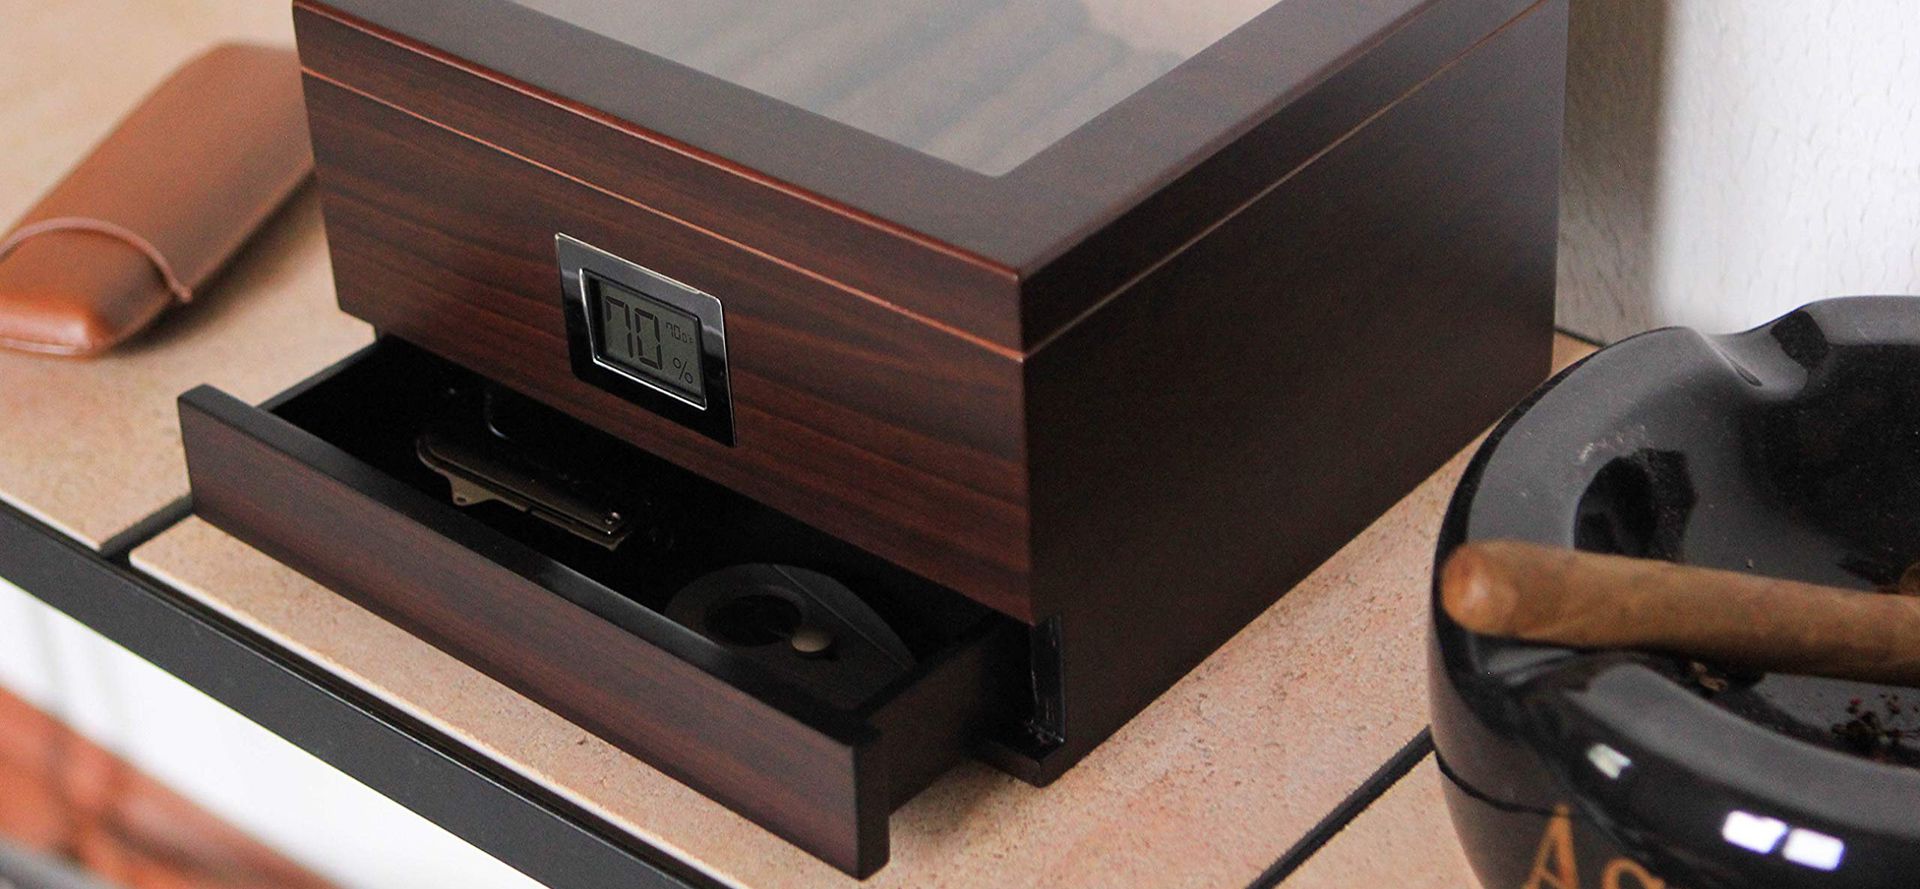 How long does it take to season an electric humidor?